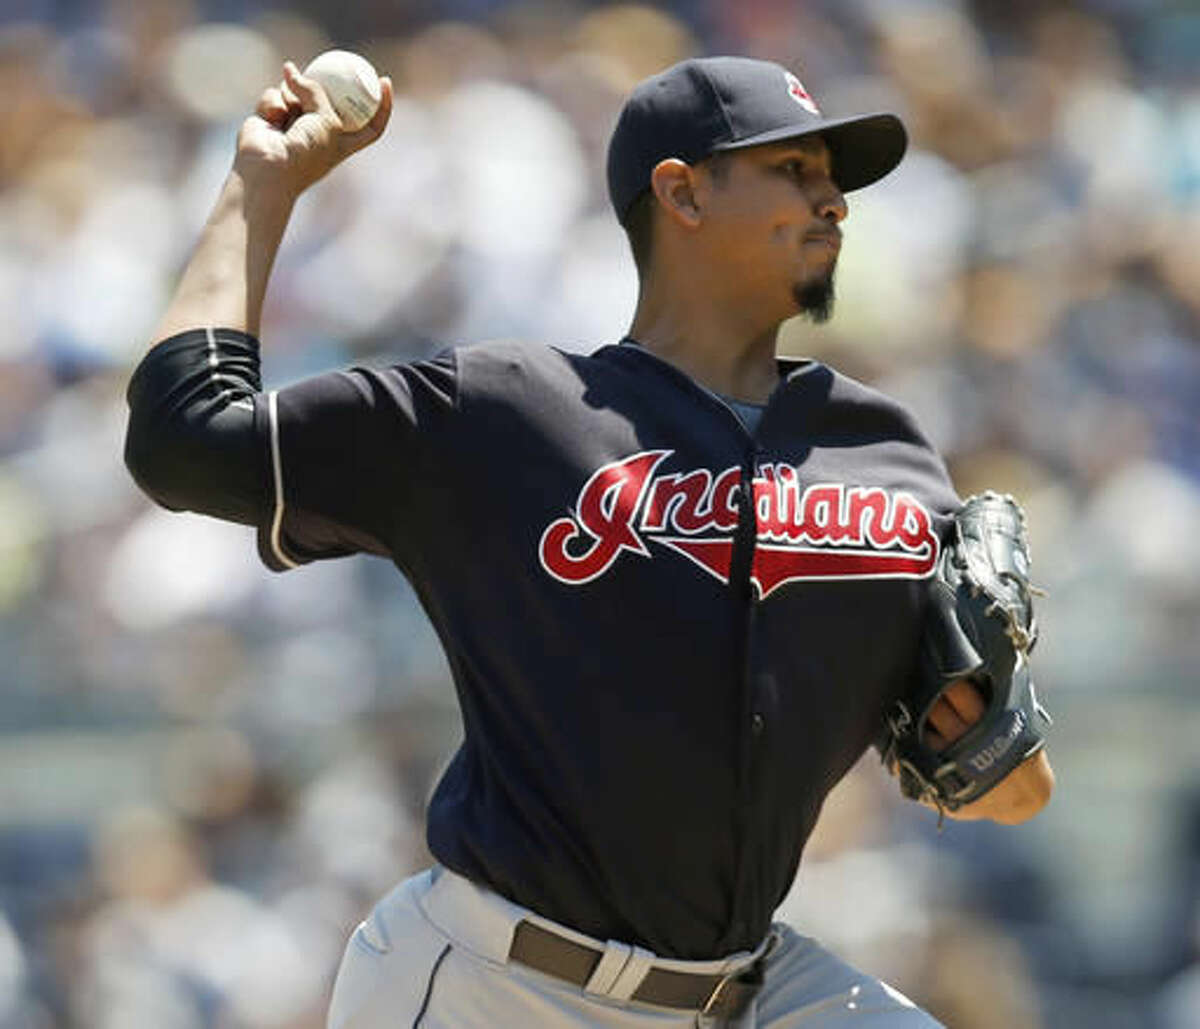 Cleveland Indians starting pitcher Carlos Carrasco delivers during the first inning of a baseball game against the New York Yankees, Sunday, Aug. 7, 2016, in New York. (AP Photo/Kathy Willens)